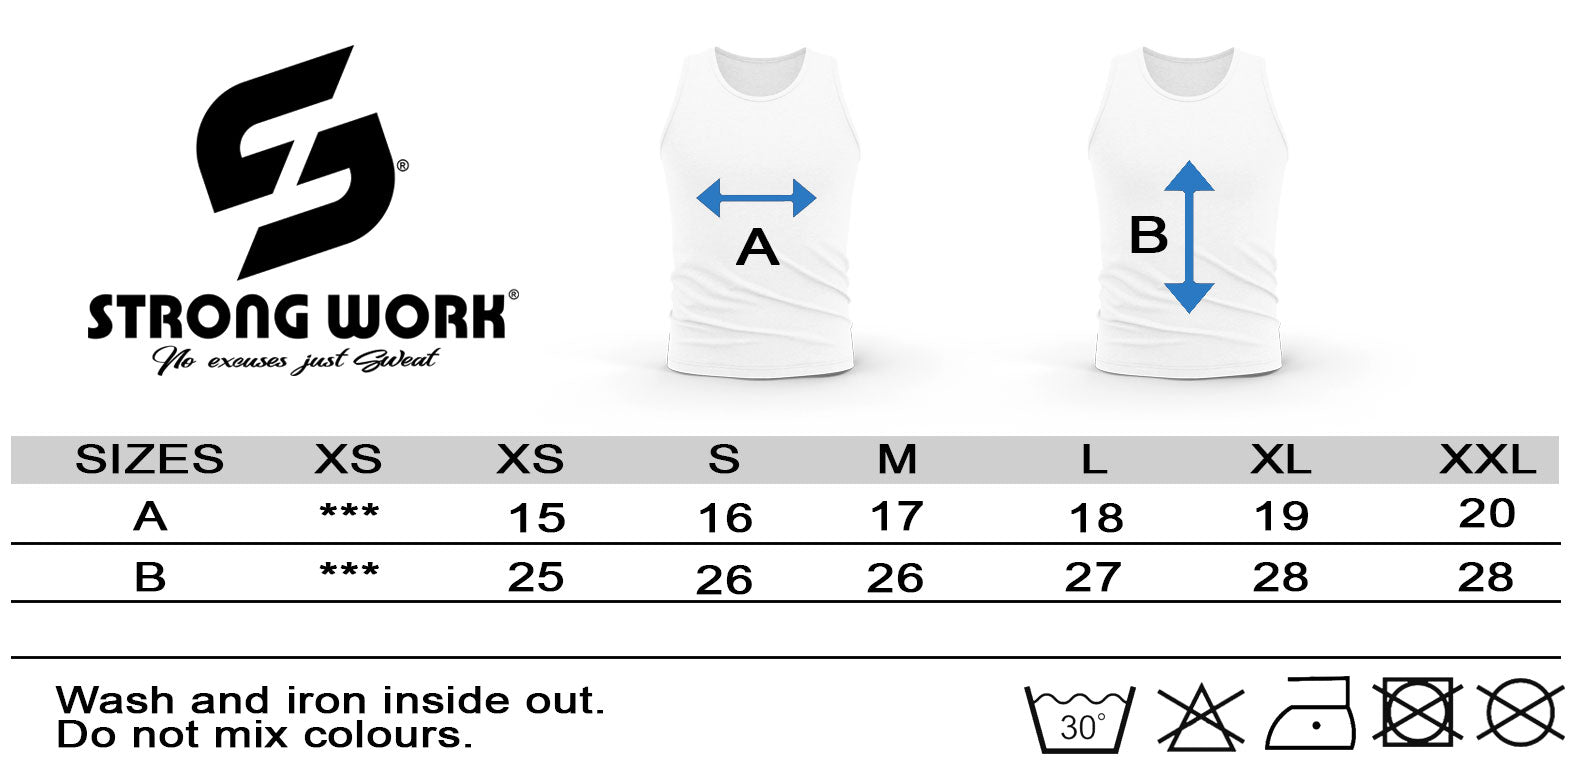 SIZE GUIDE STRONG WORK CLASSIC TANK TOP FOR WOMEN